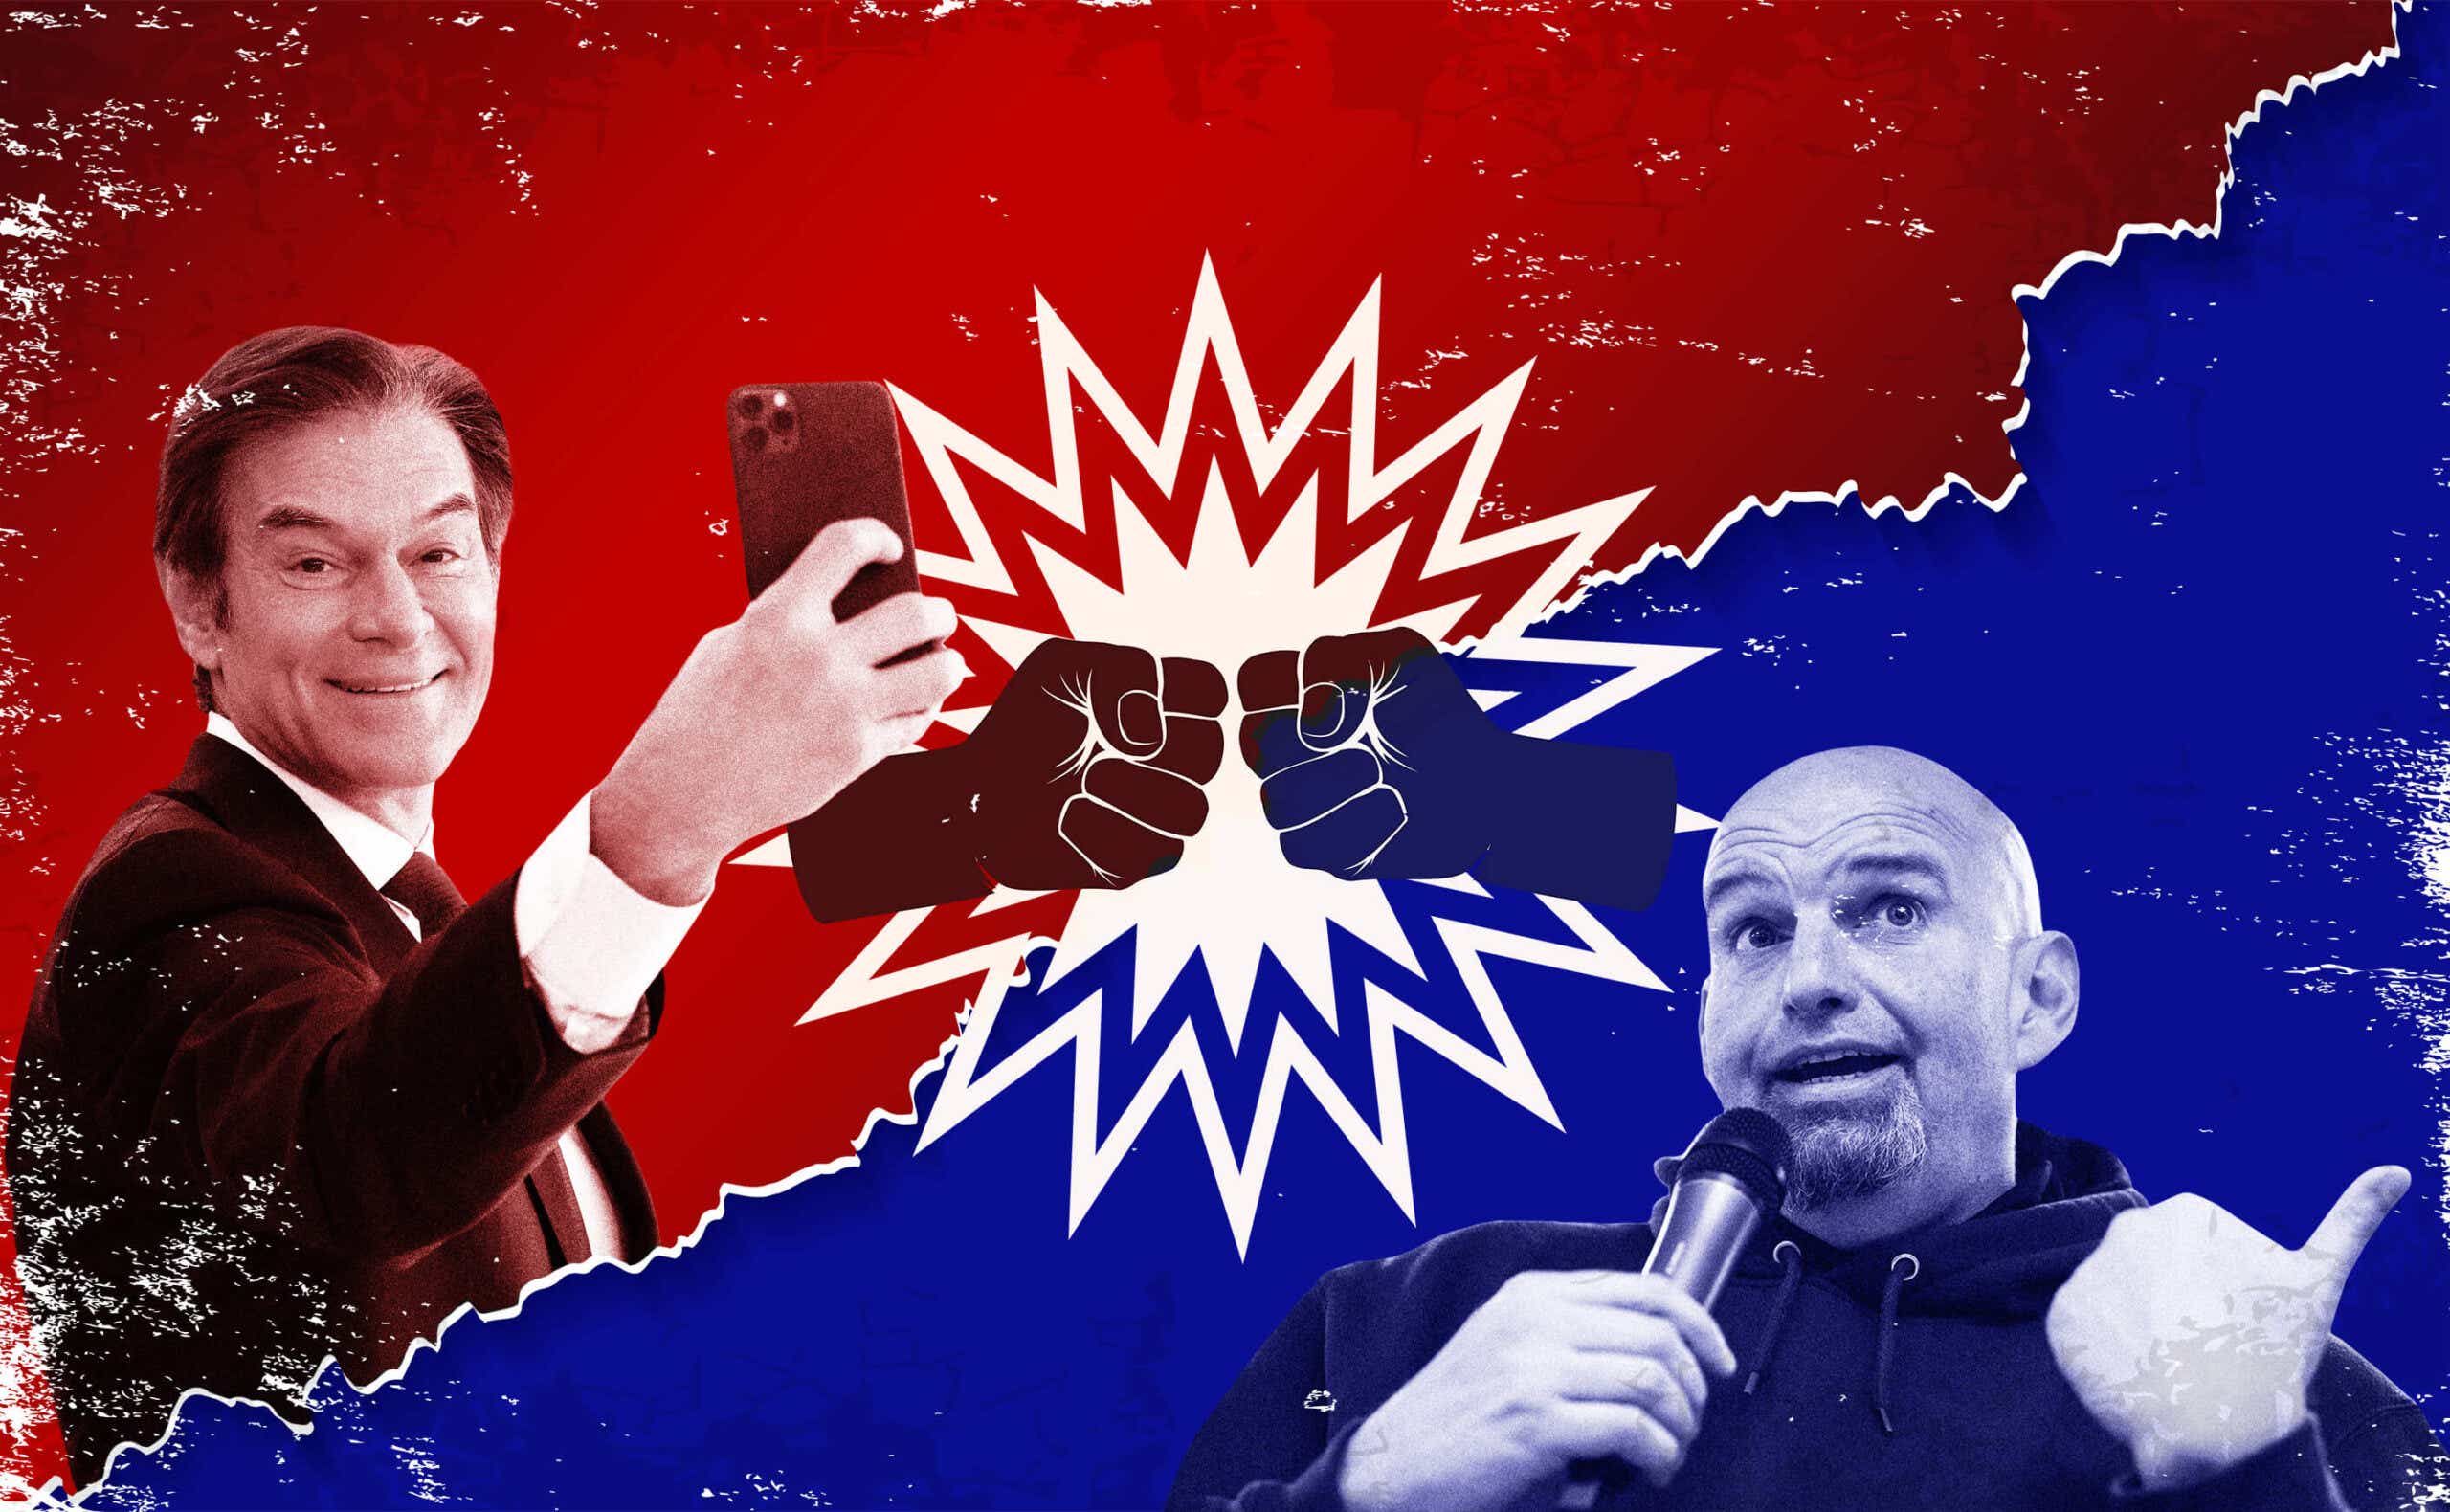 Dr Oz and John Fetterman with fists in blue and red